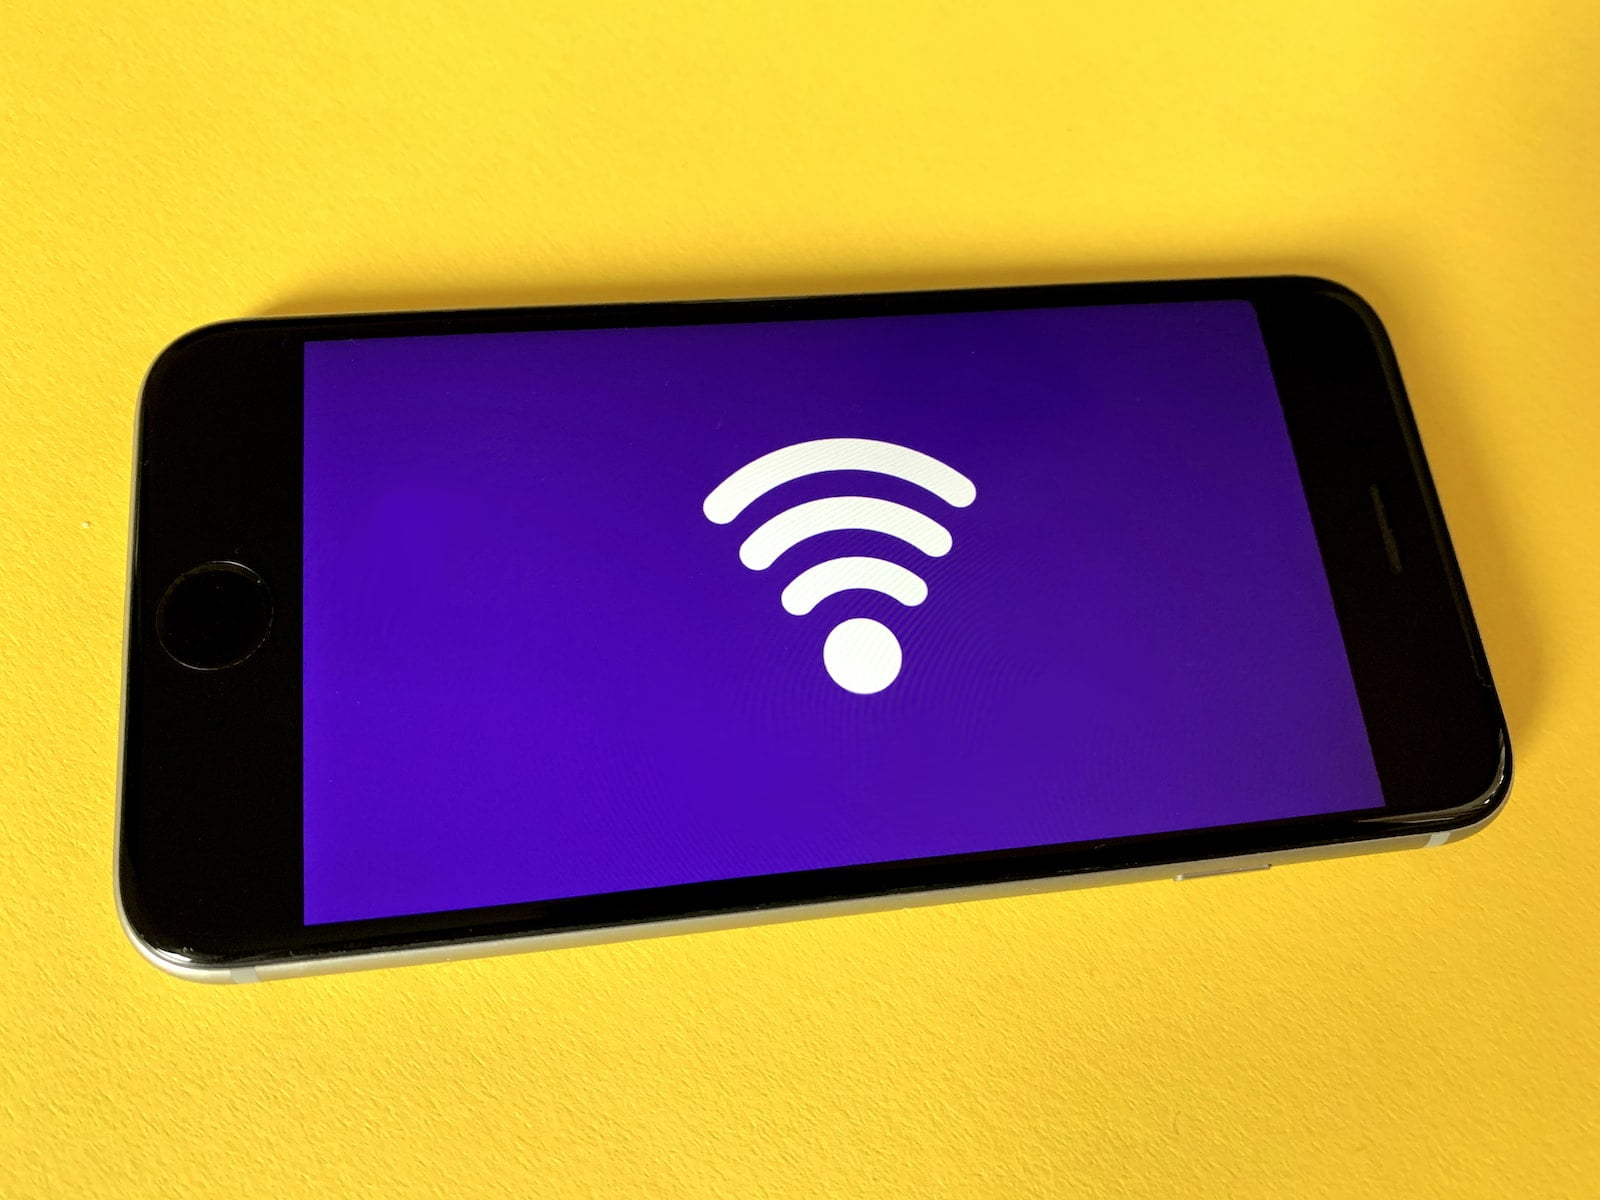 Compartir WIFI desde Android